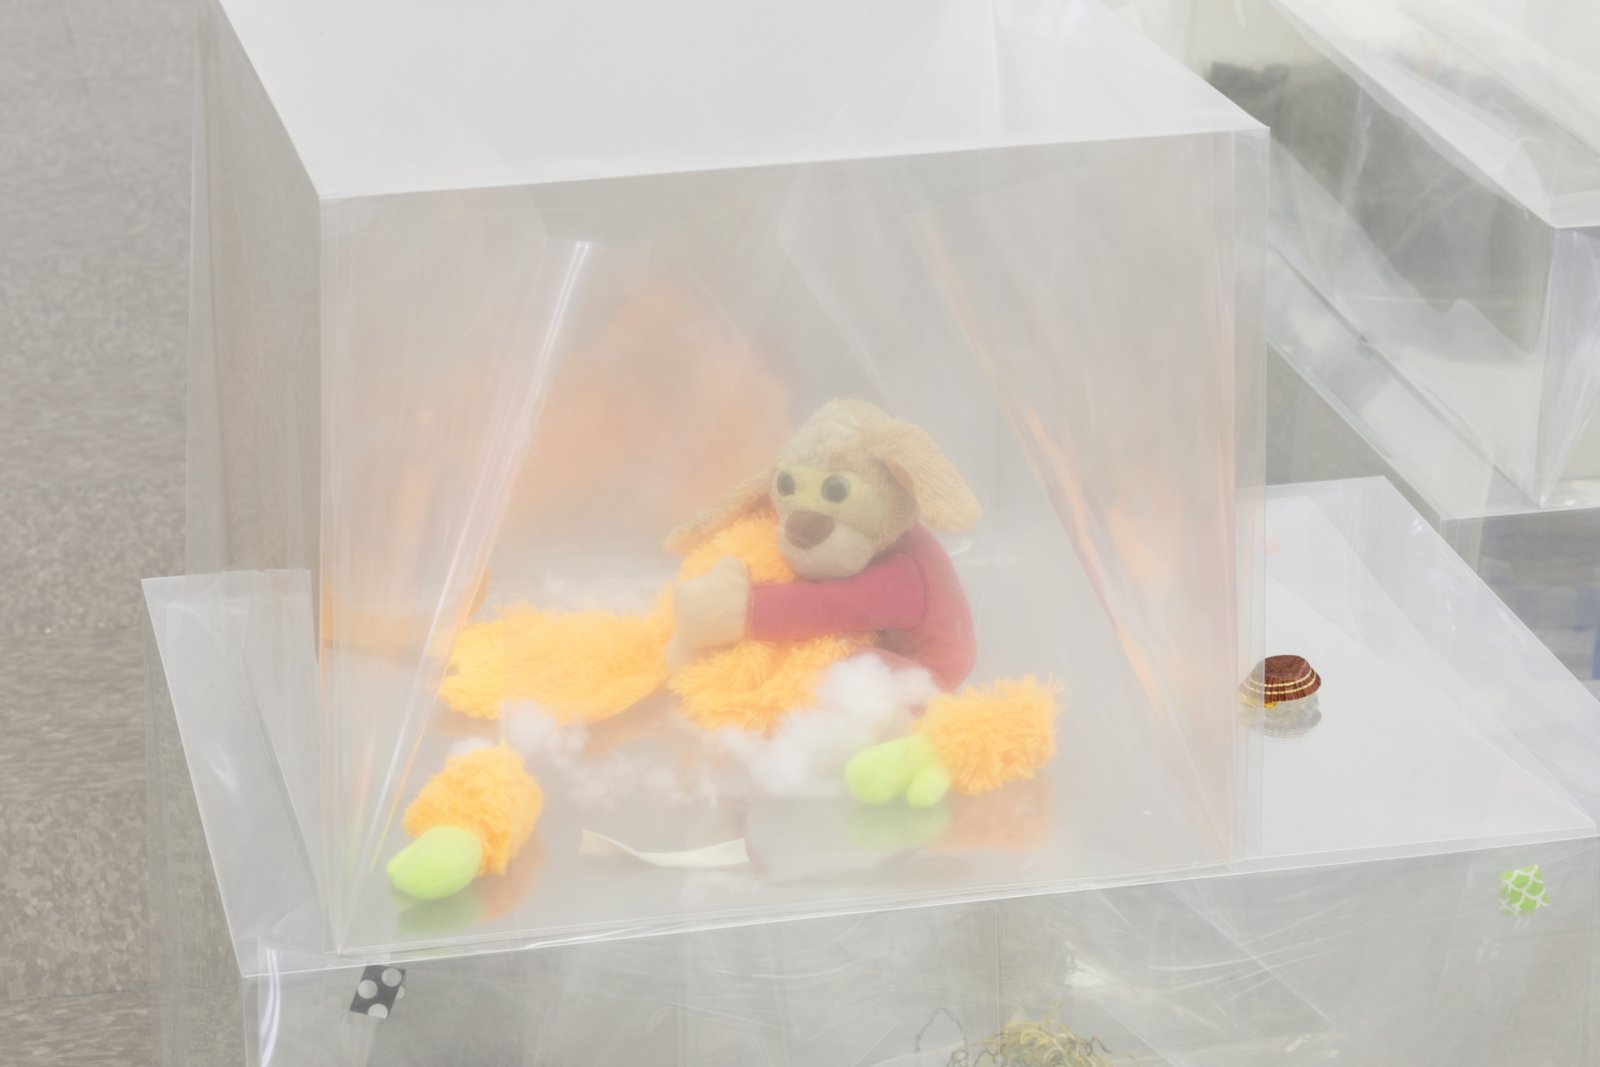 Liz Magor, Pet Co. (detail), 2018, polyester film, textiles, paper, stuffed toys, rat skins, mixed media, 44 x 204 x 156 in. (112 x 518 x 396 cm). Installation view, BLOWOUT, The Renaissance Society, Chicago, USA, 2019